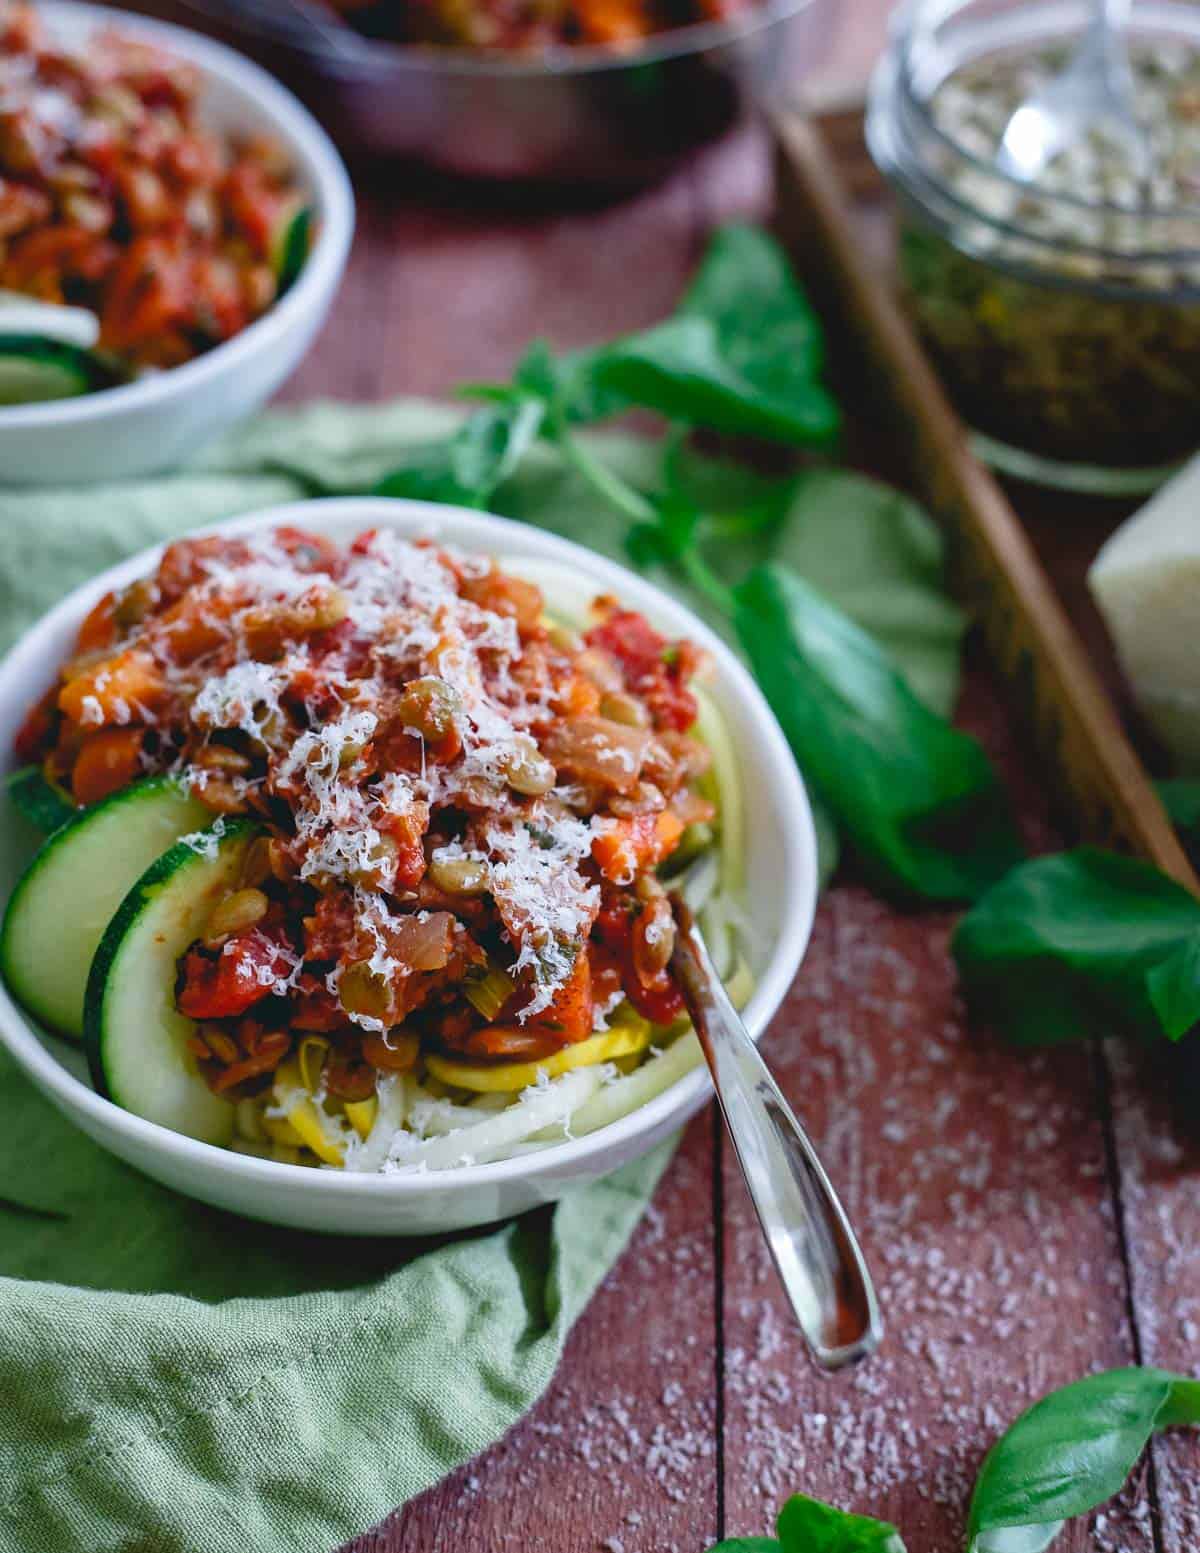 This lentil bolognese is a lighter summer alternative when you're craving a hearty Italian meal.